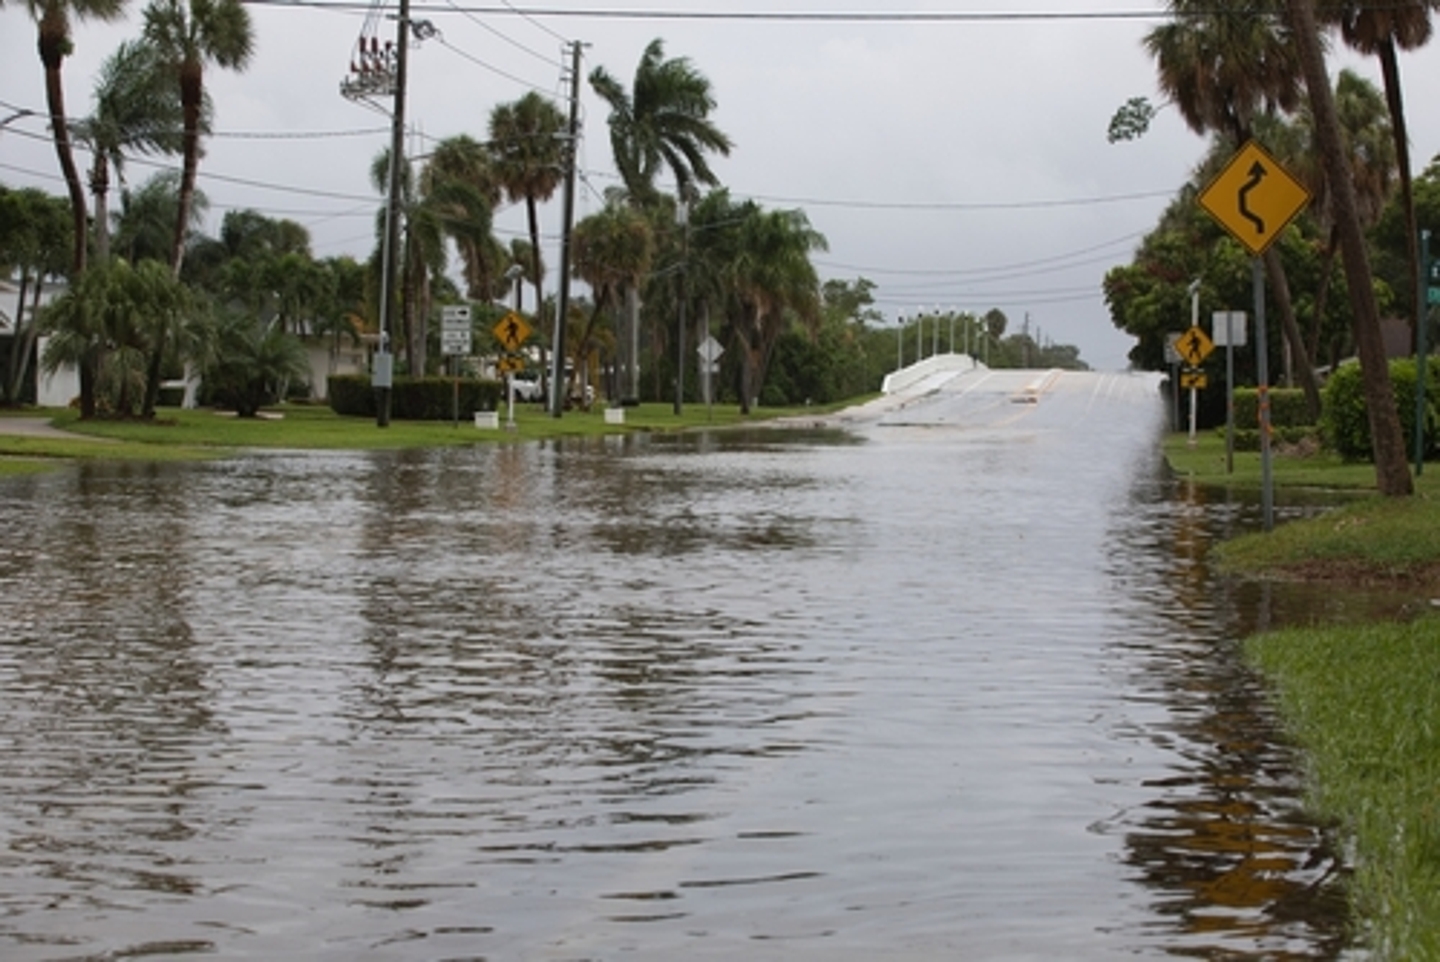 Storm surge accompanies tropical storms and hurricanes. Know what to do to protect your home or business ahead of a storm surge. SERVPRO® is Here to Help® when you need water damage restoration.